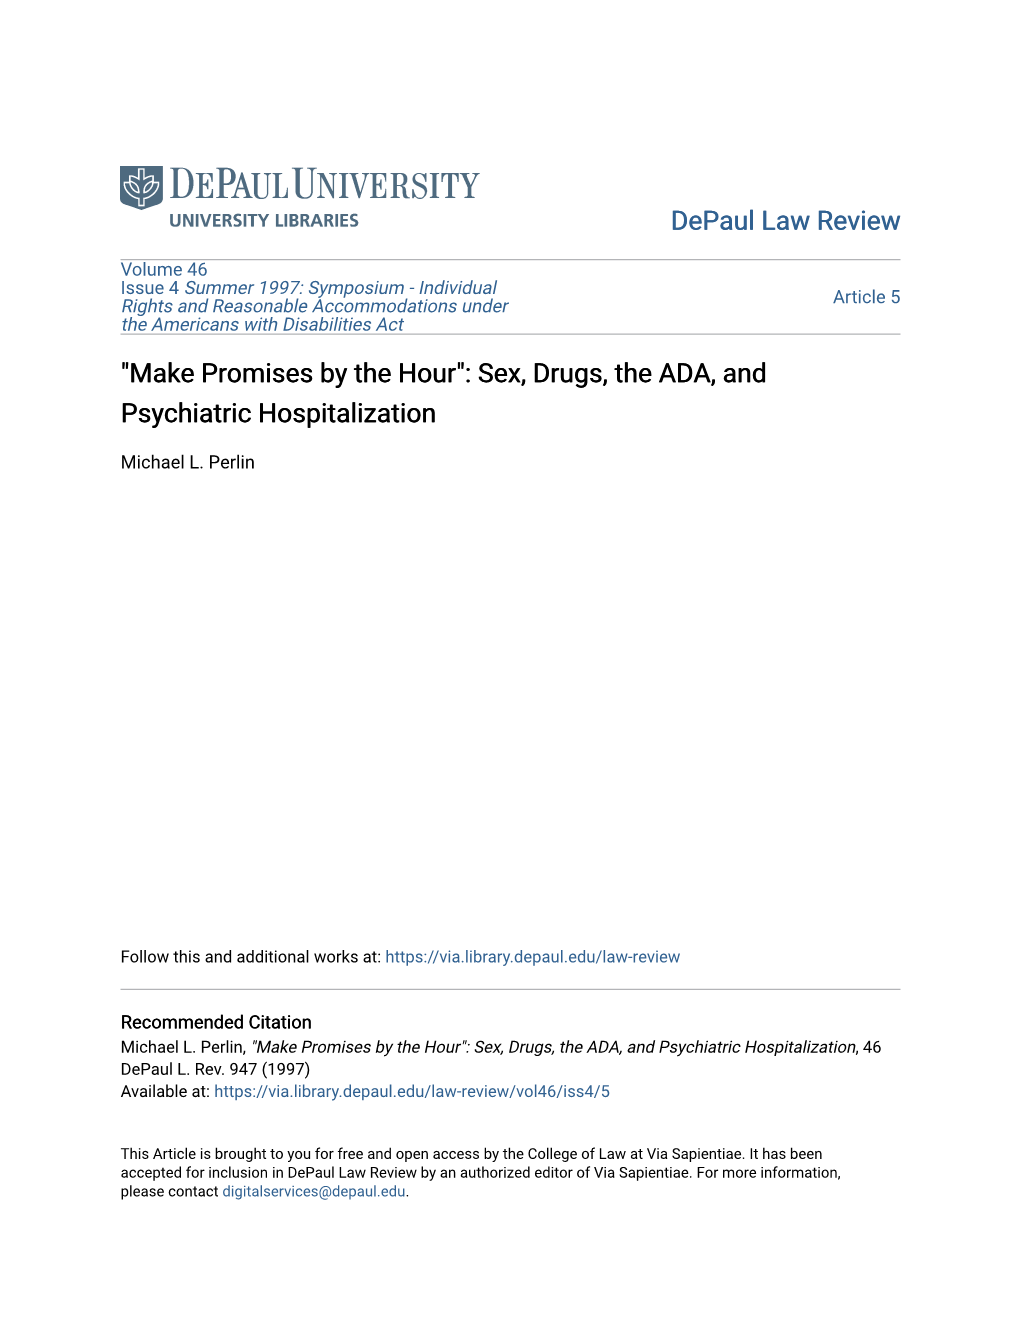 "Make Promises by the Hour": Sex, Drugs, the ADA, and Psychiatric Hospitalization